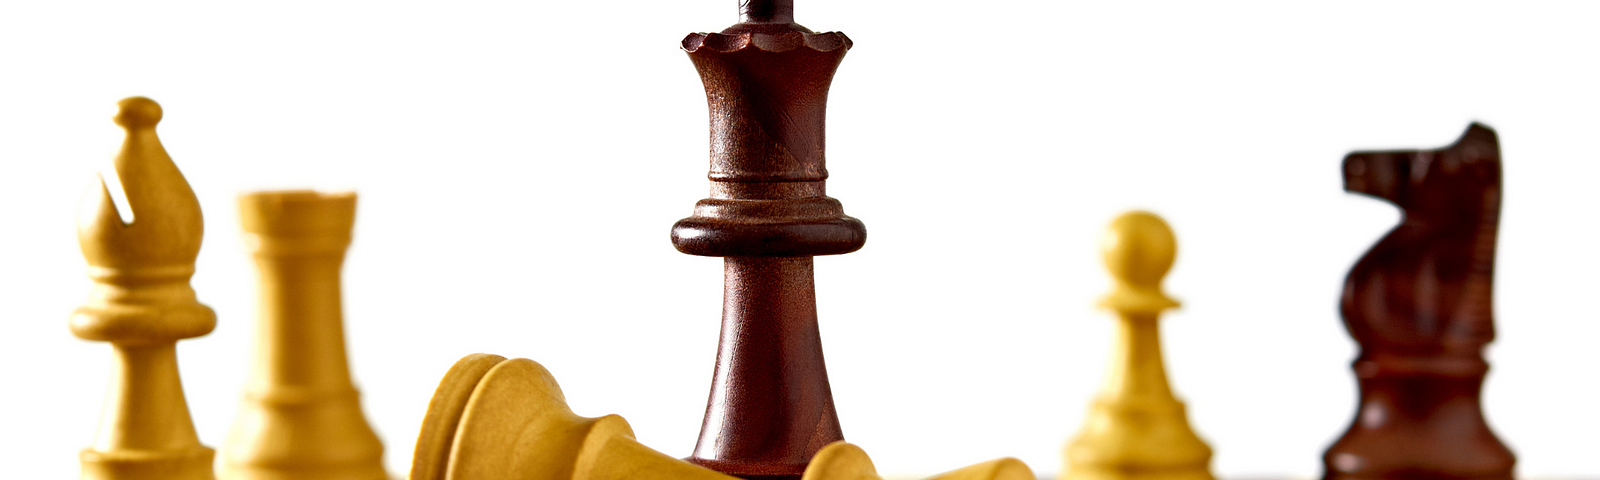 Marriage and Chess: Checkmate!. This may change your mind about